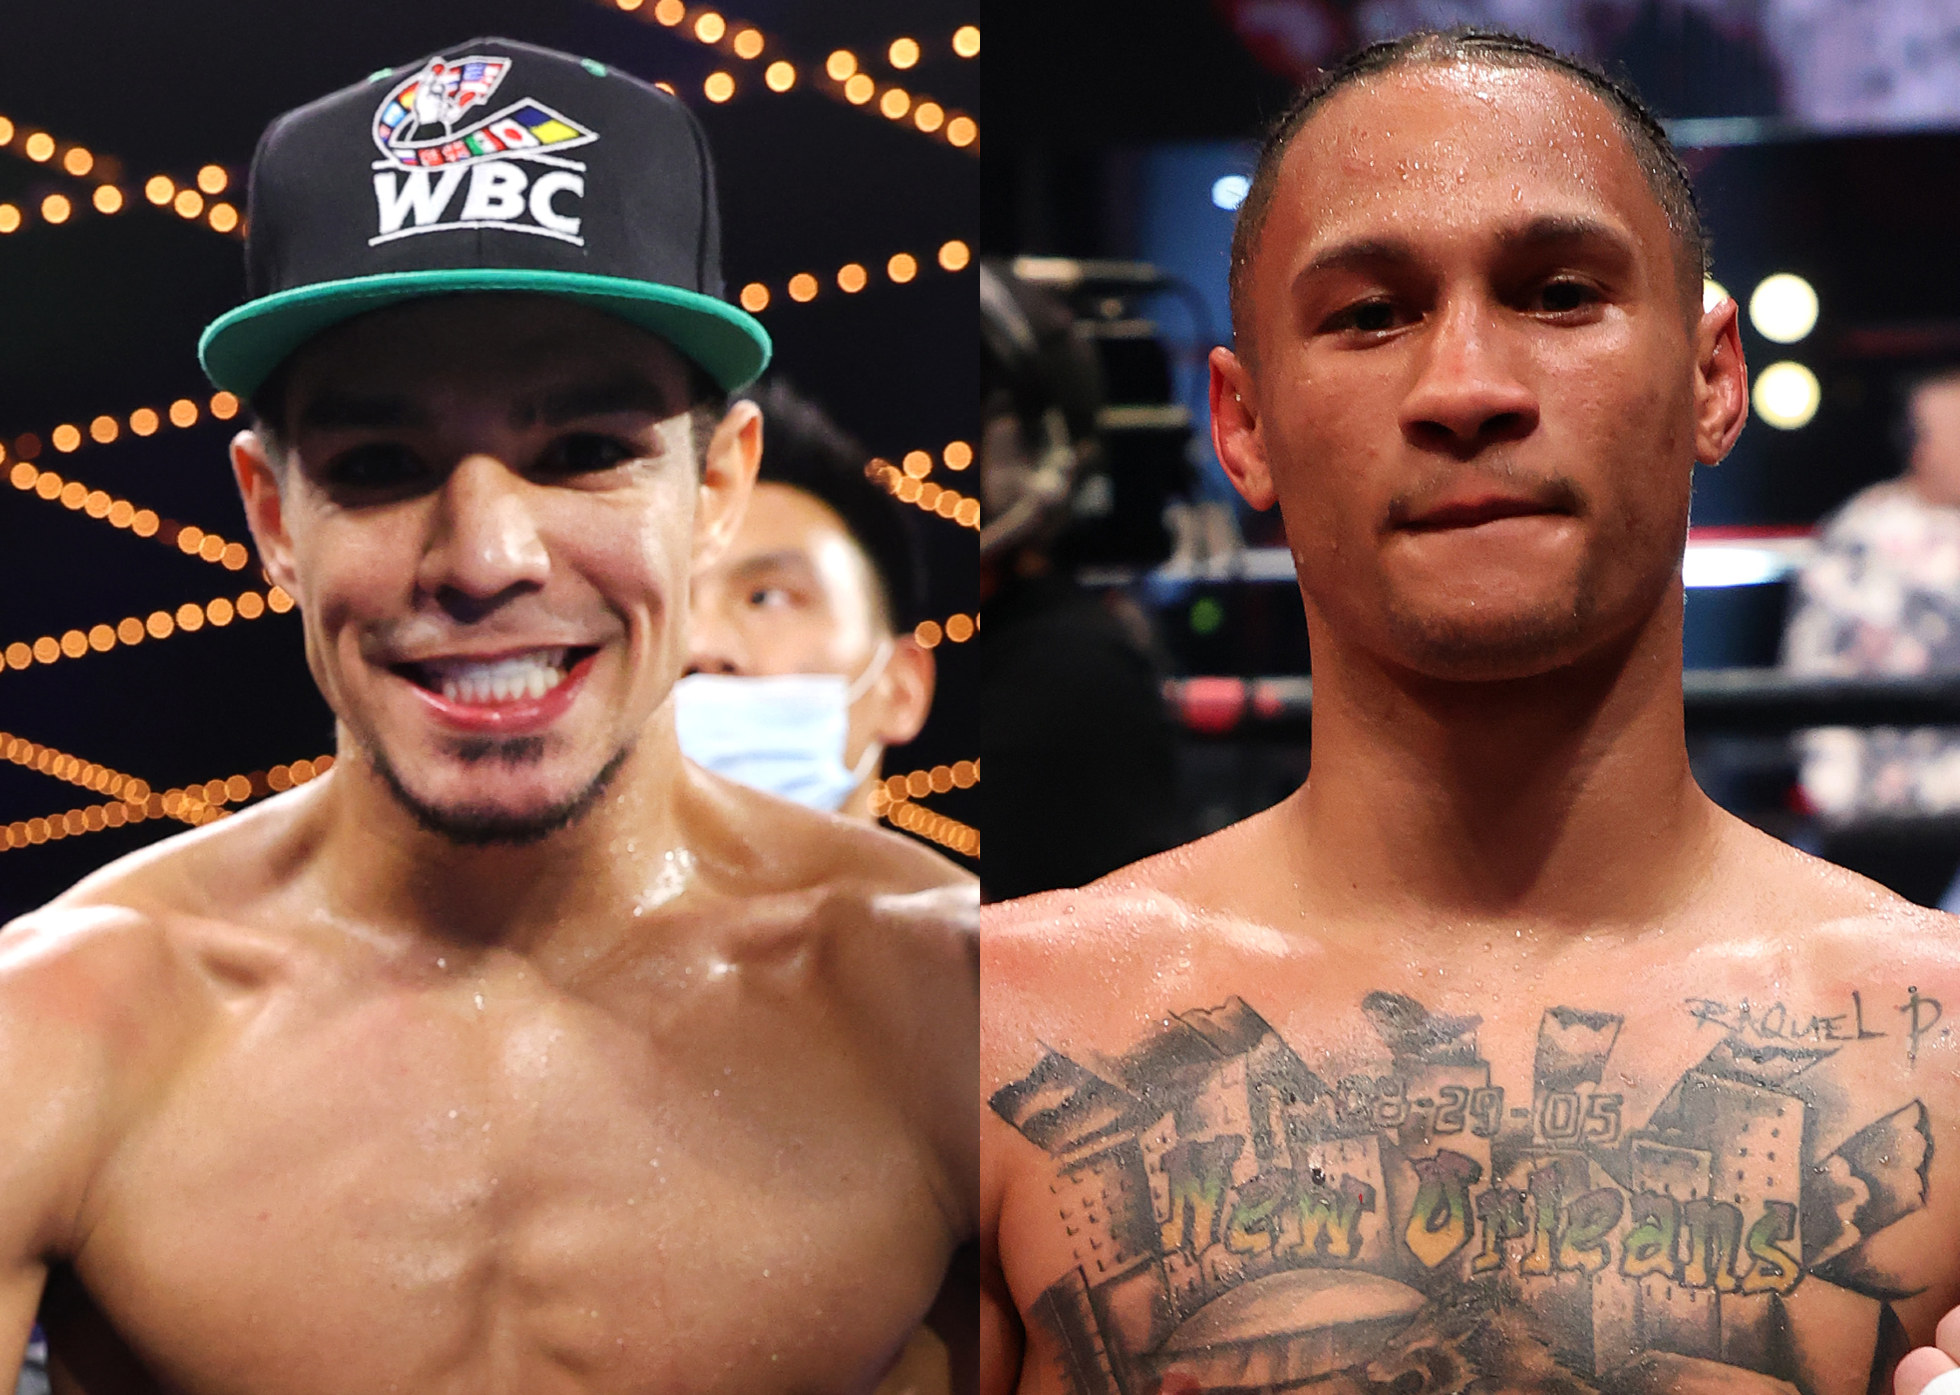 Jose Zepeda and Regis Prograis meet this weekend, plus more to actually be excited about in boxing right now!